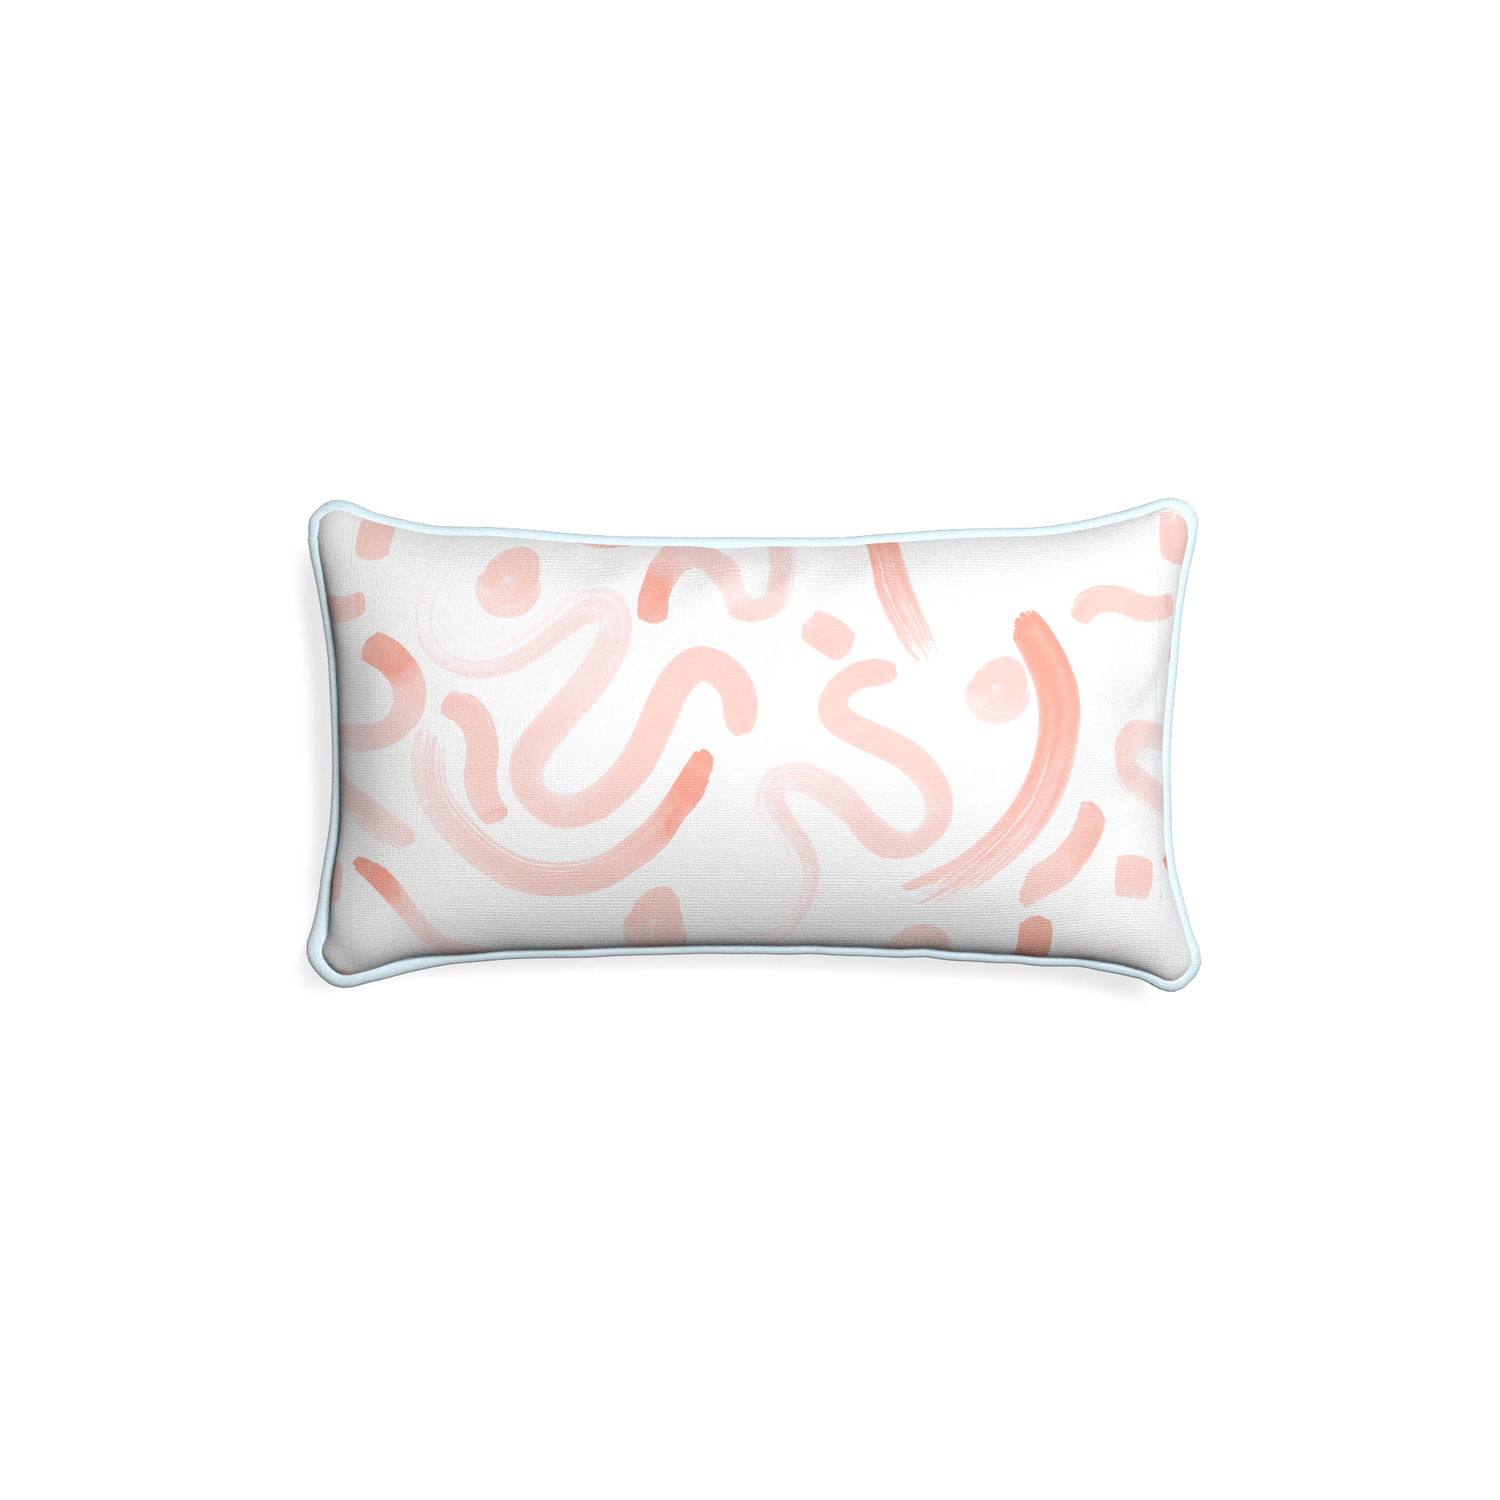 Petite-lumbar hockney pink custom pink graphicpillow with powder piping on white background